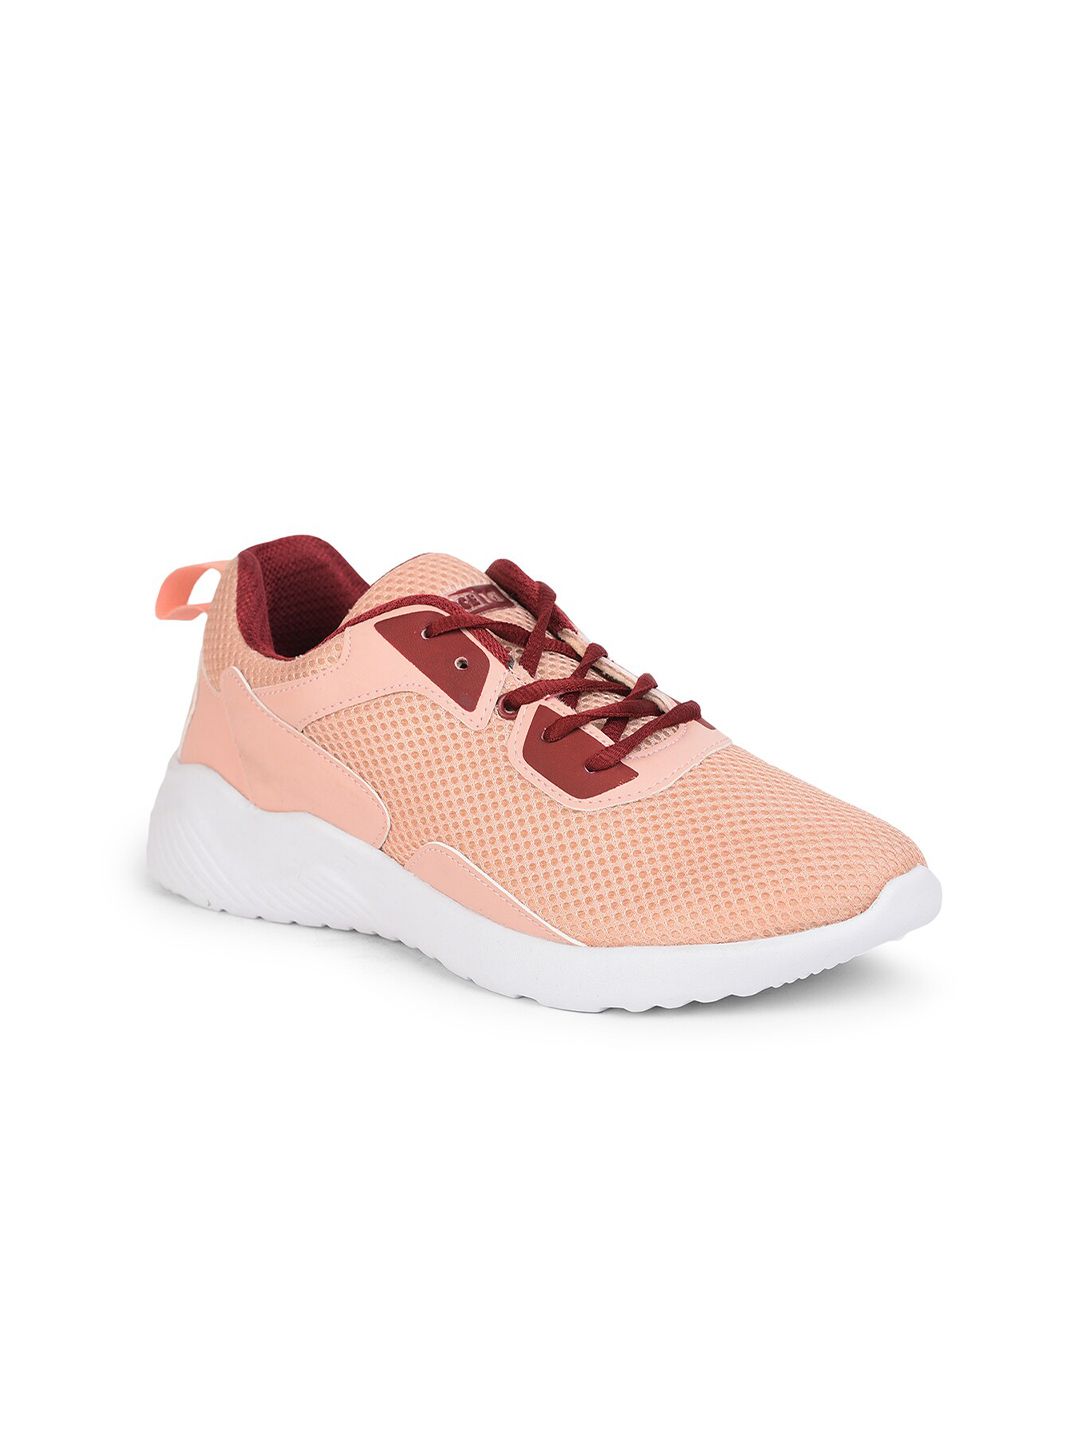 Liberty Women Peach-Coloured Mesh Walking Shoes Price in India